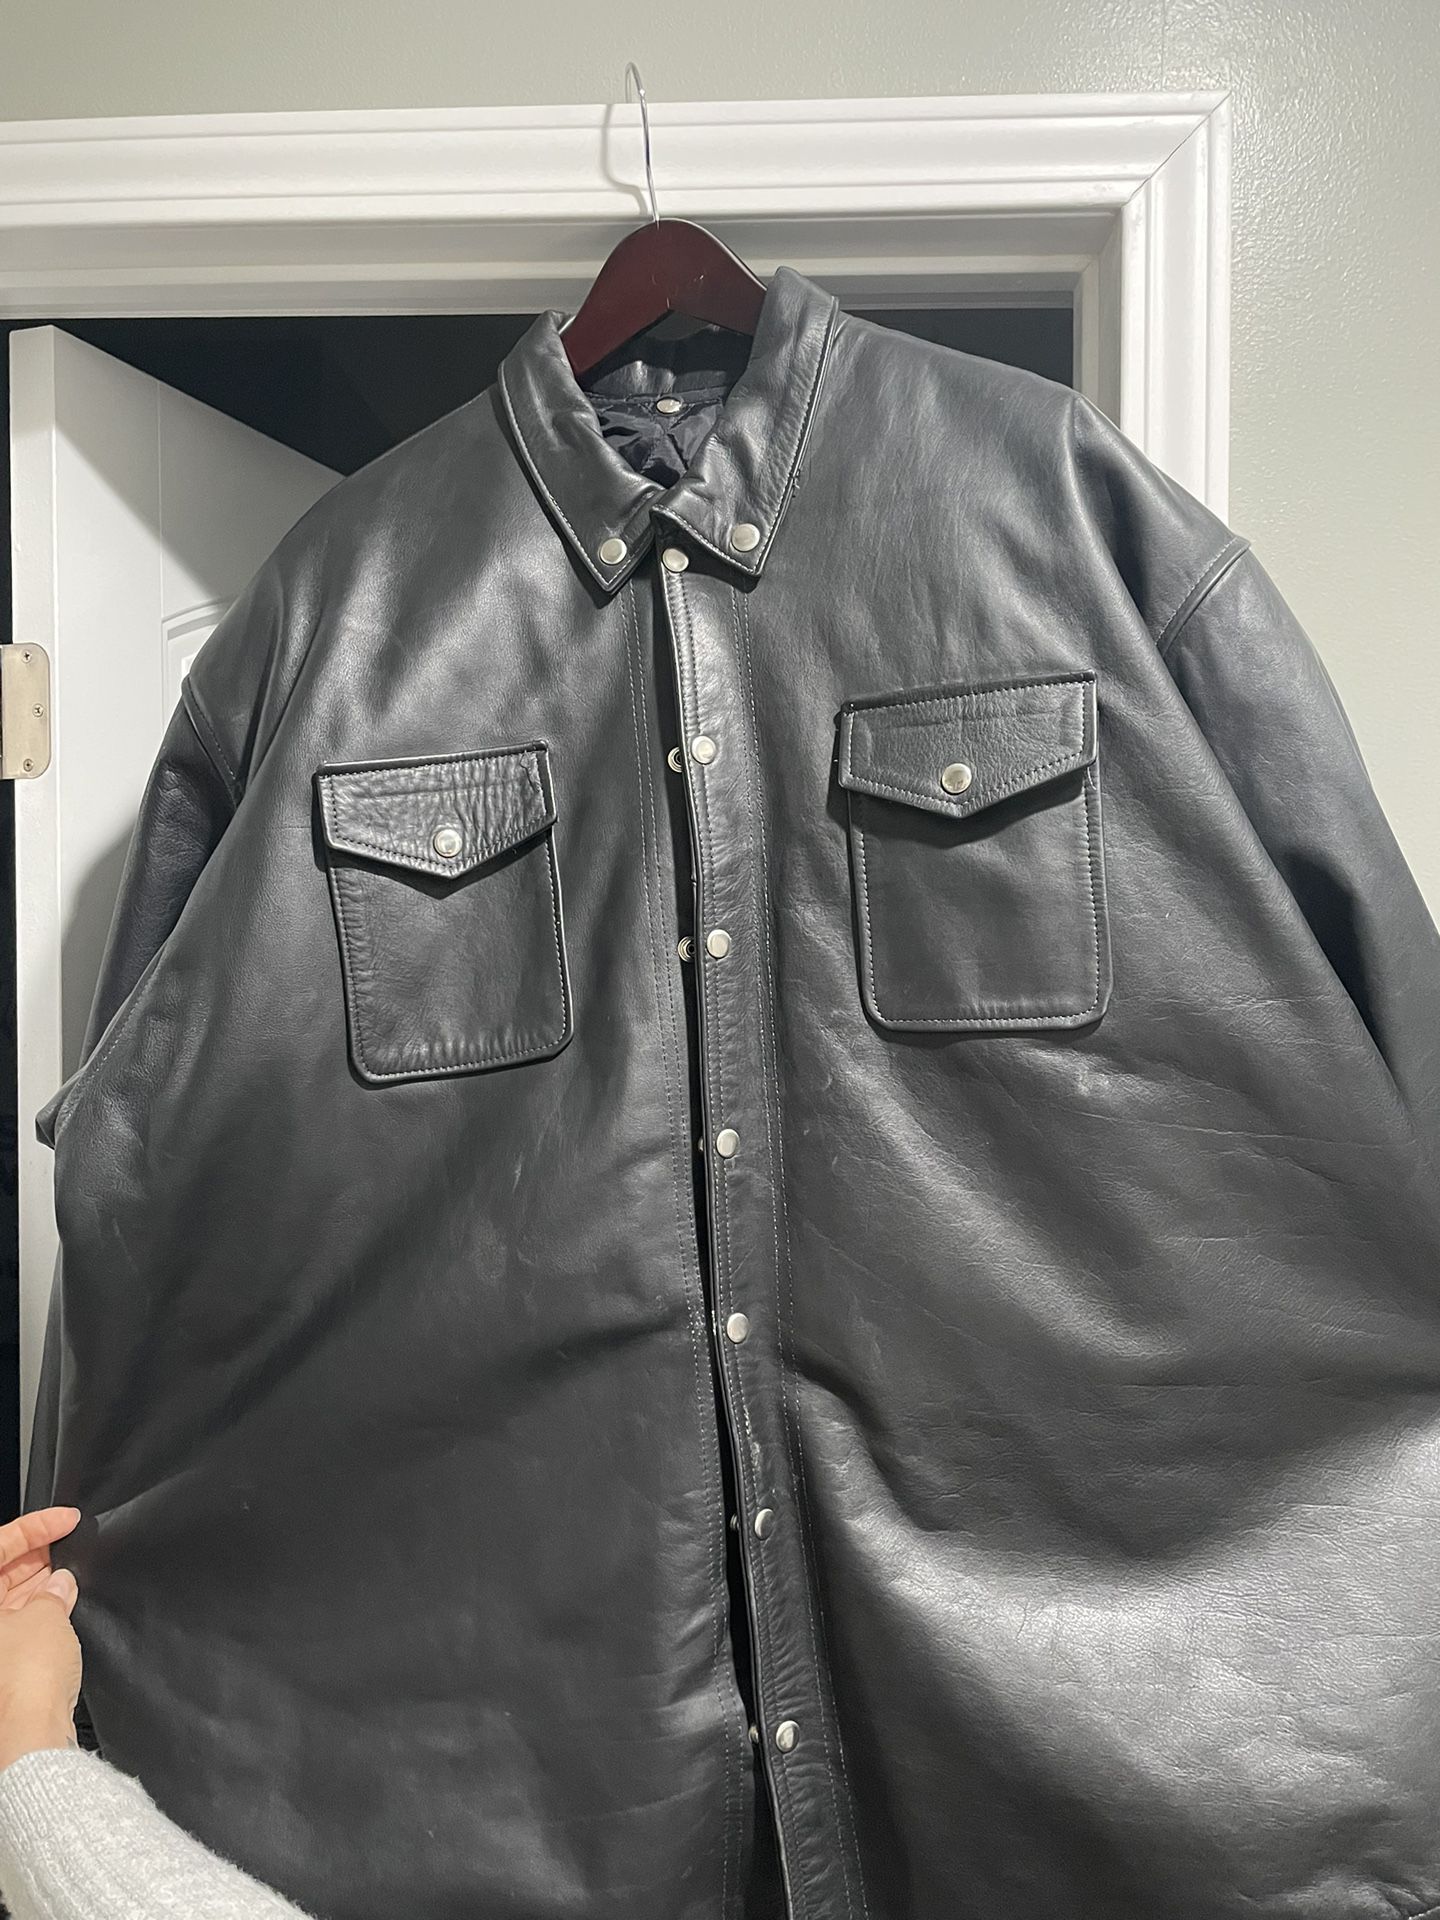 Leather Double Insulated Jacket 3XL